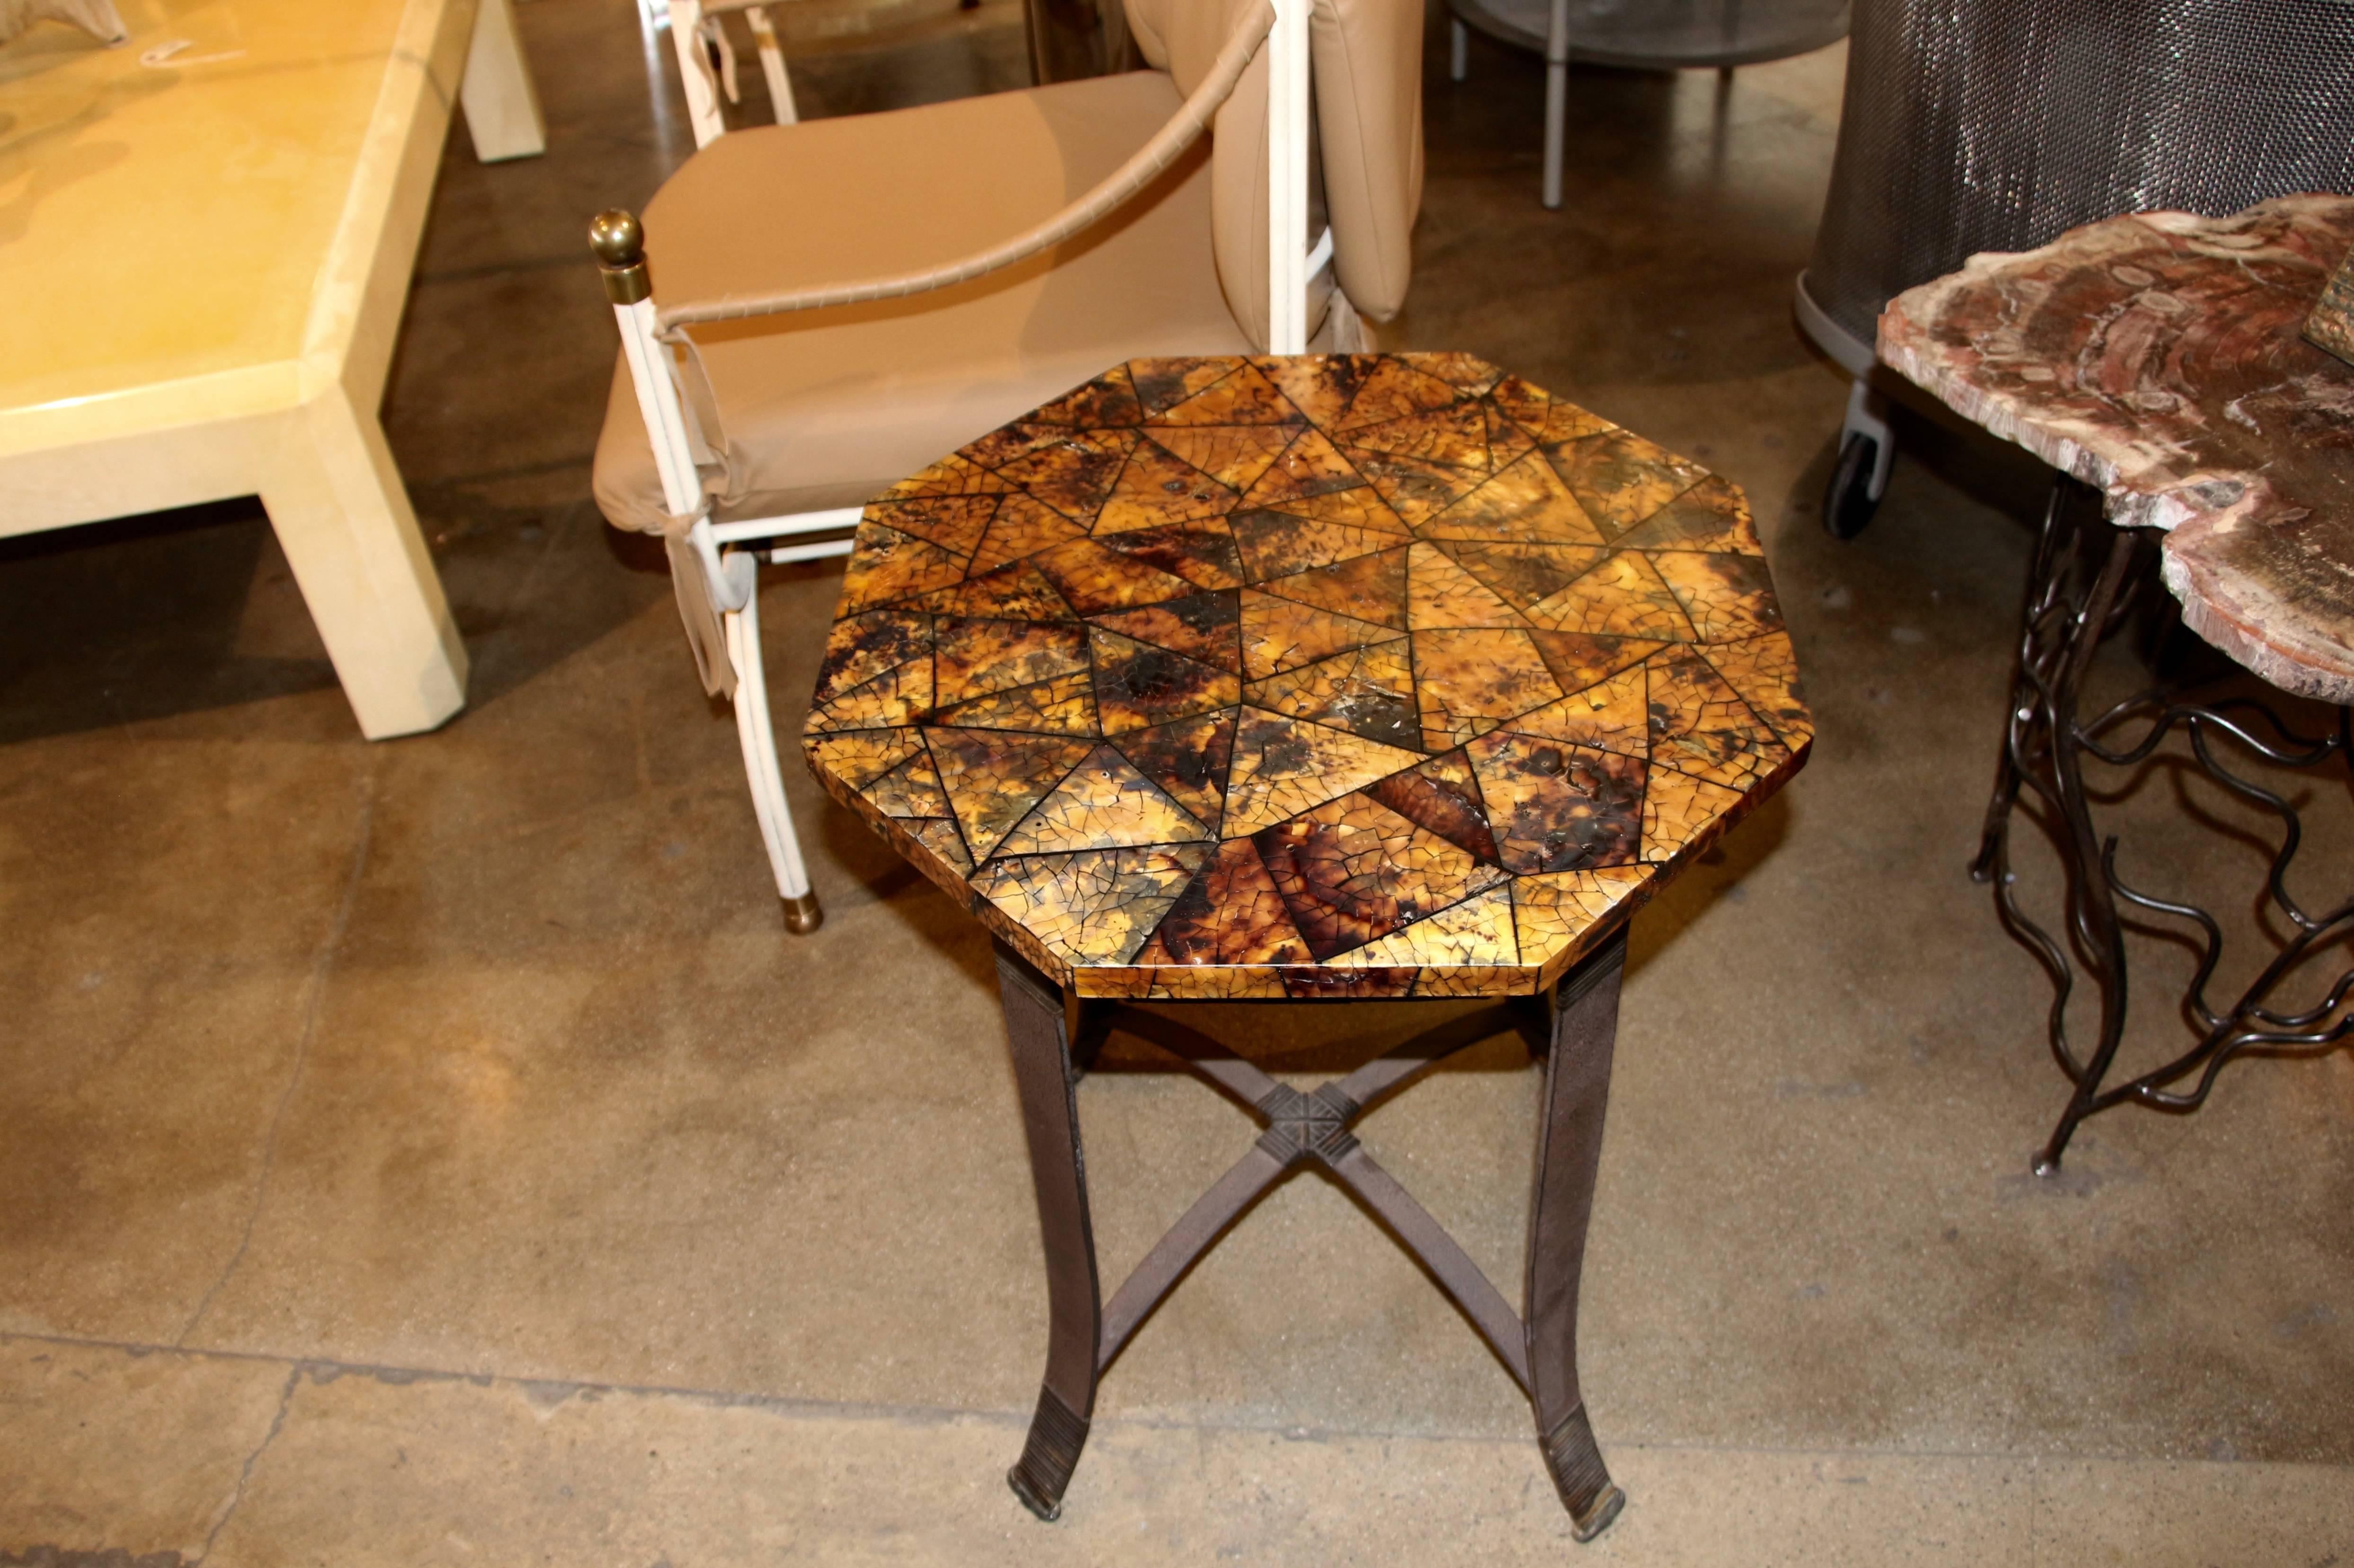 coconut shell table